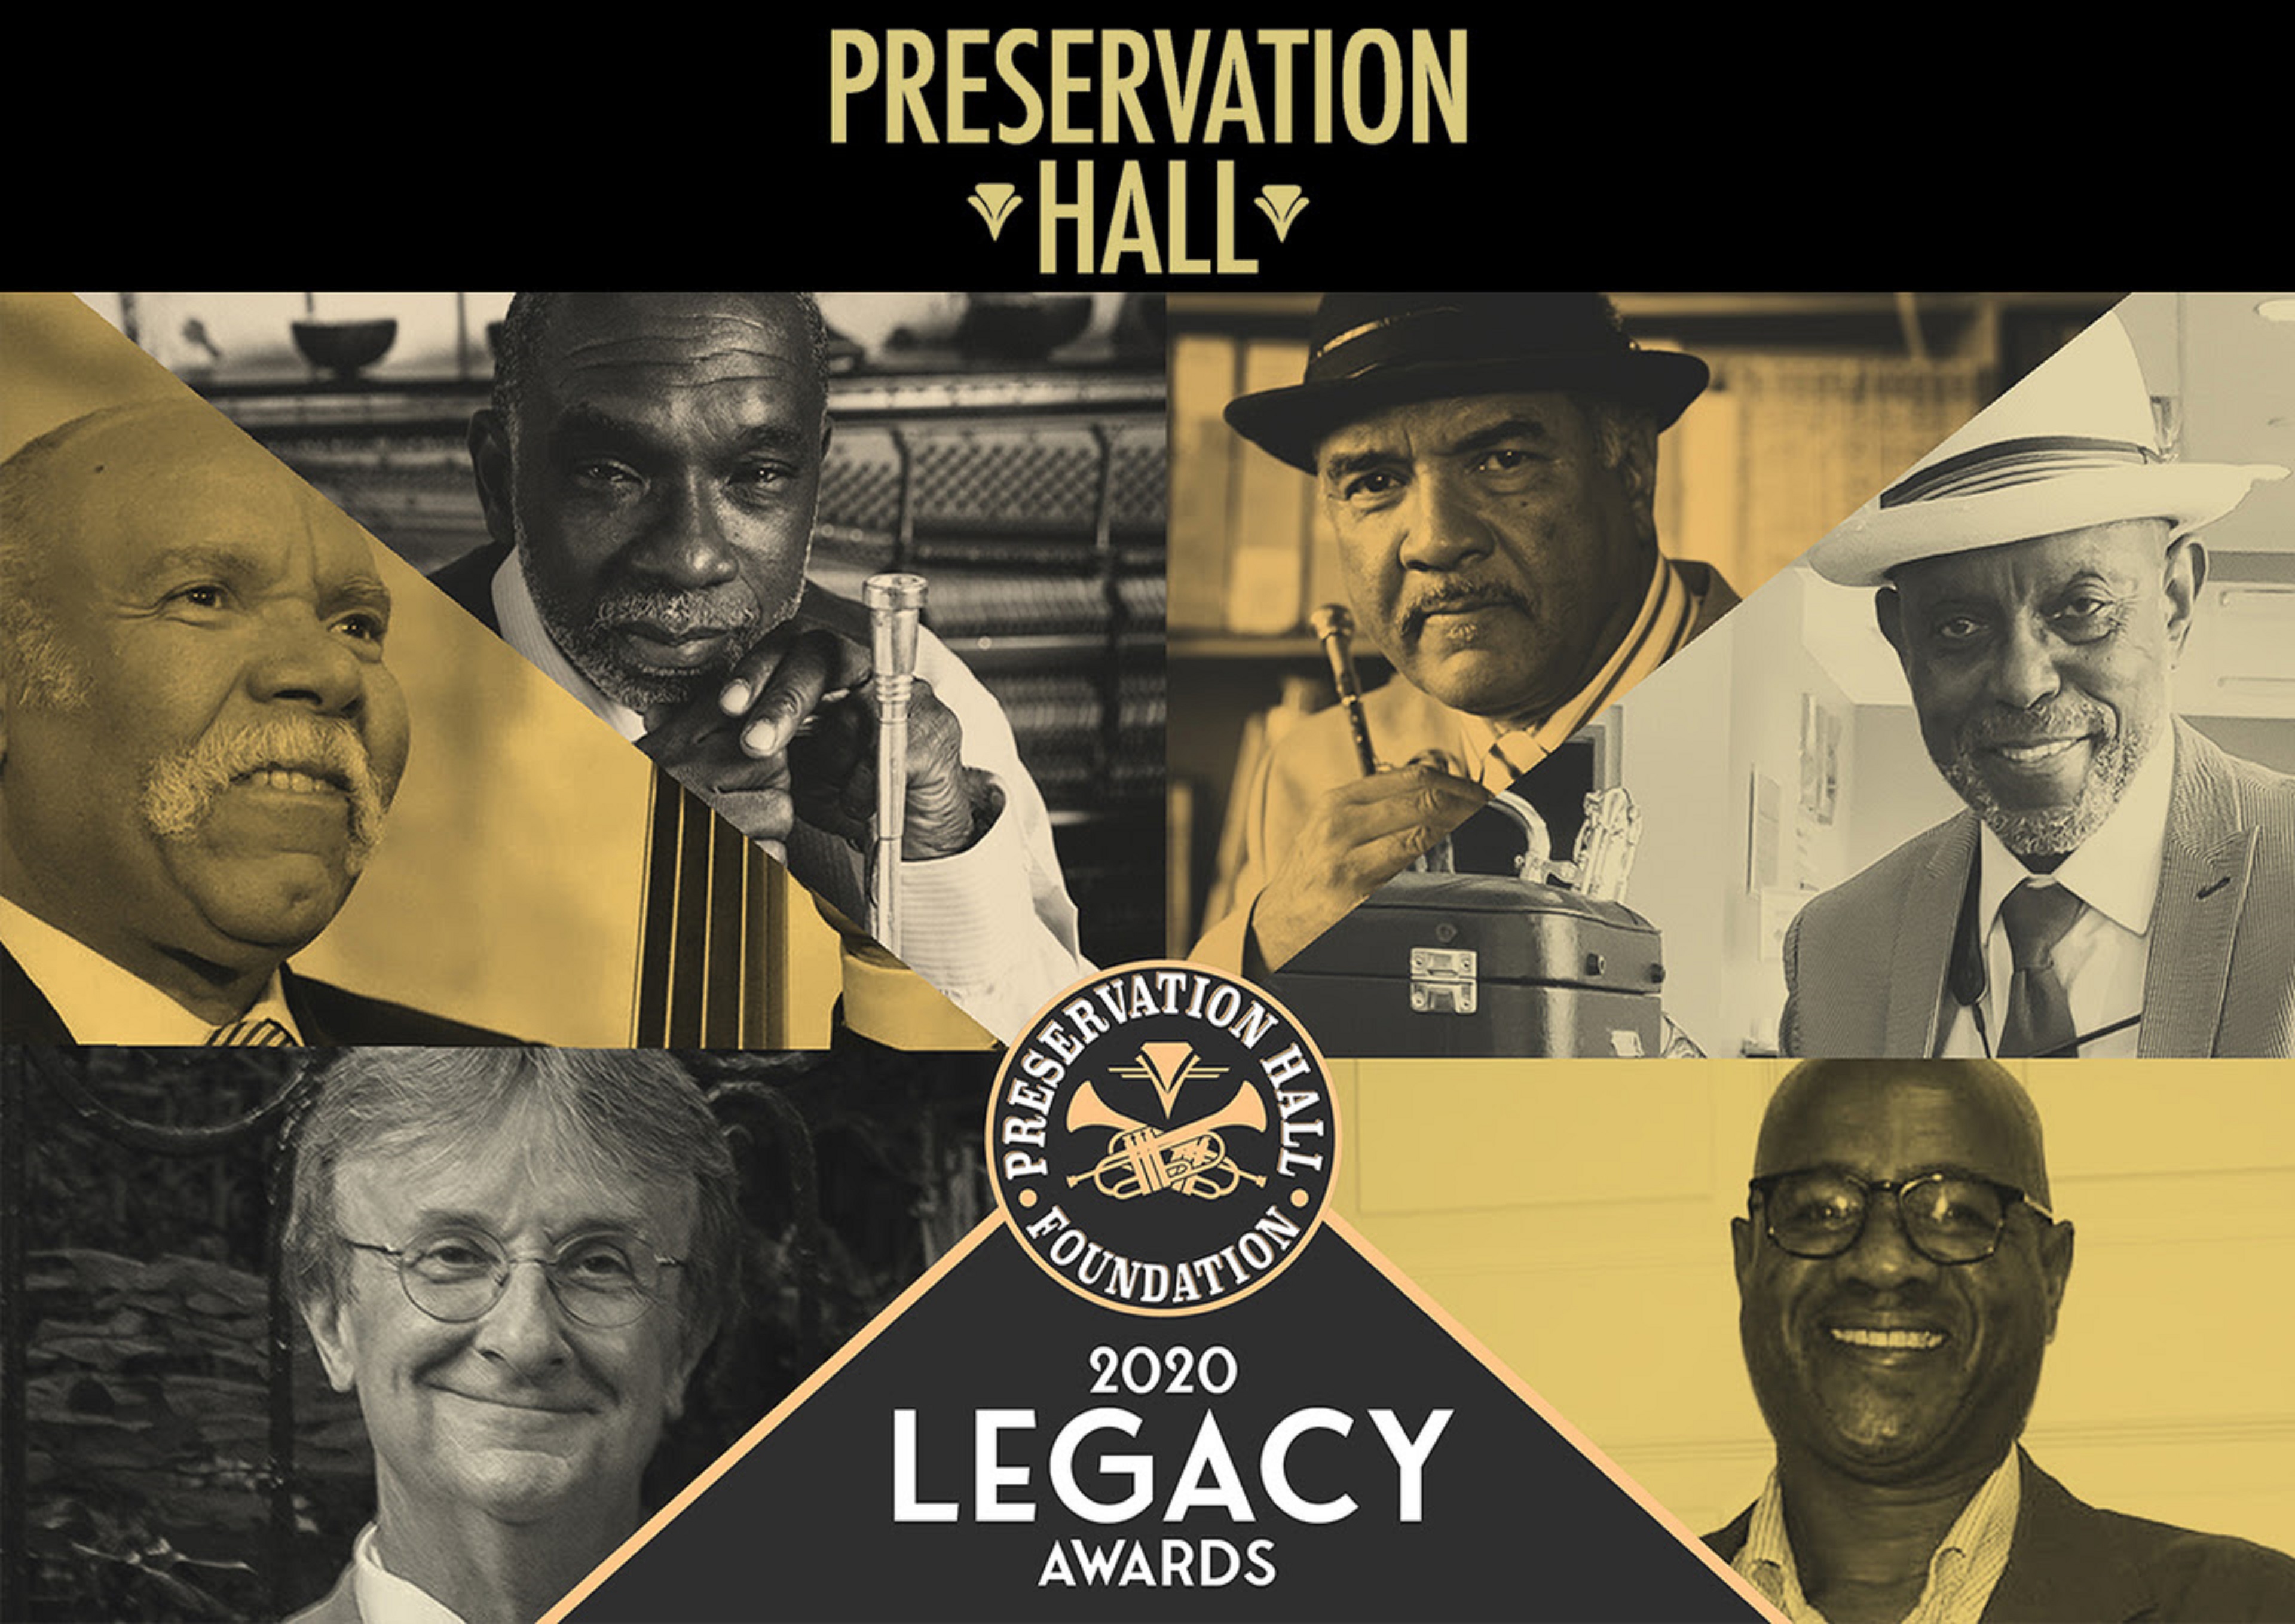 Announcing the 2020 Preservation Hall Foundation Legacy Awards